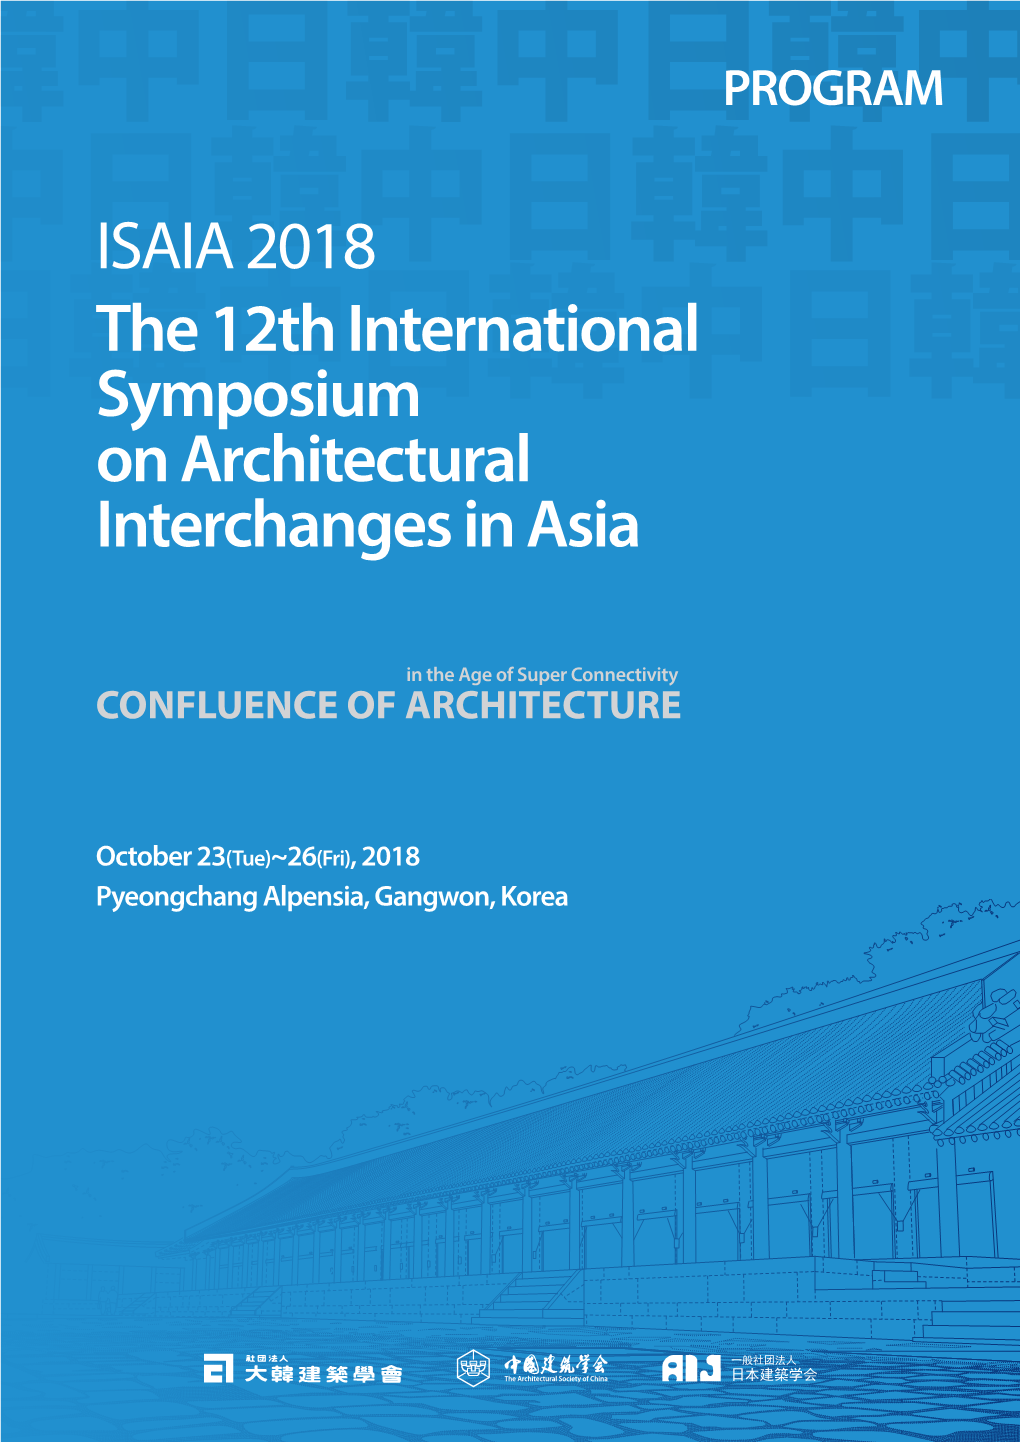 ISAIA 2018 the 12Th International Symposium on Architectural Interchanges in Asia